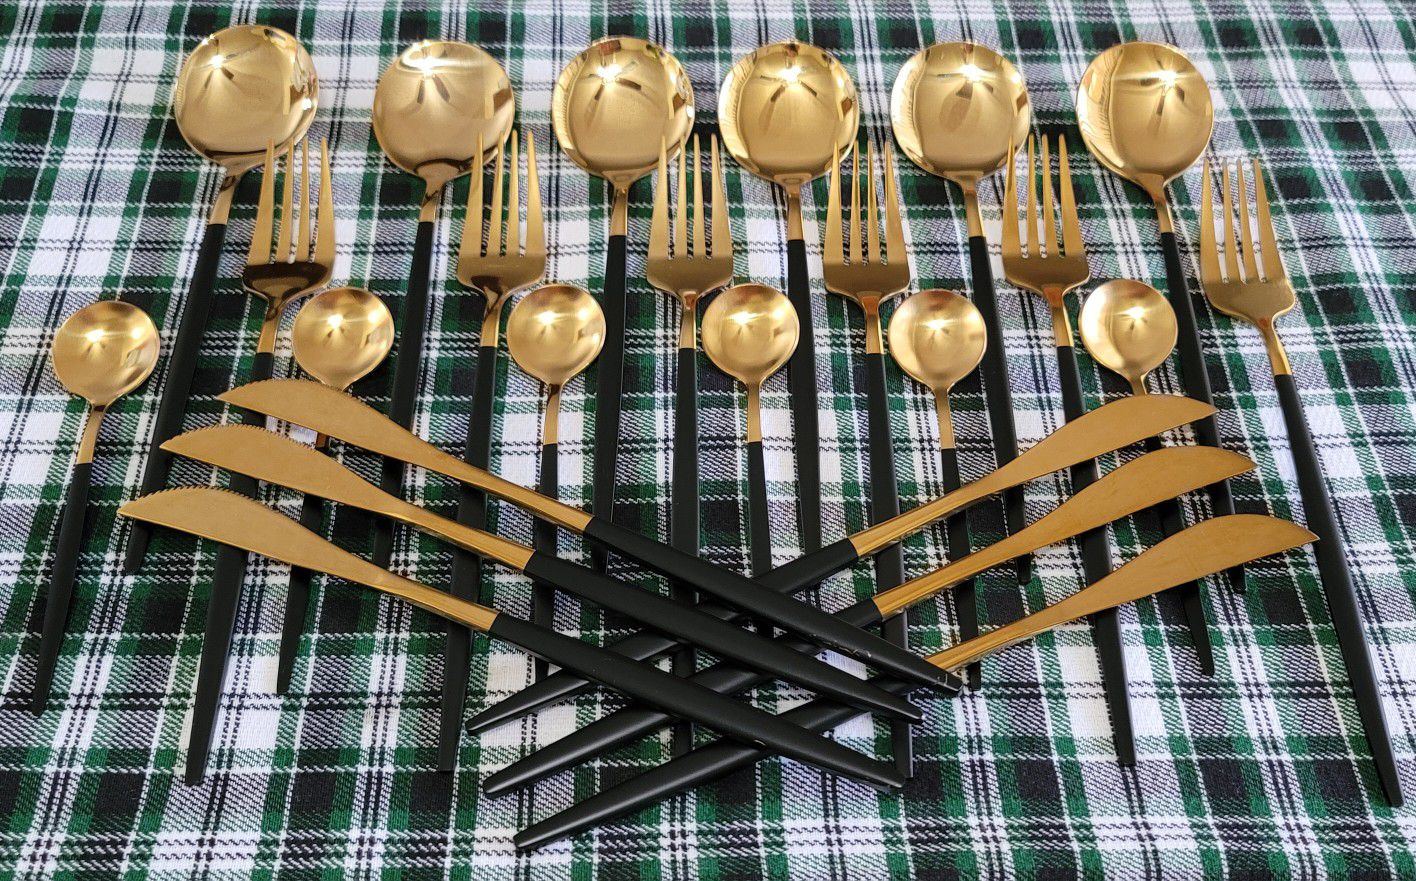 BRAND NEW Modern Style Black & Gold Stainless Steel FLATWARE 24 PIECES SET 